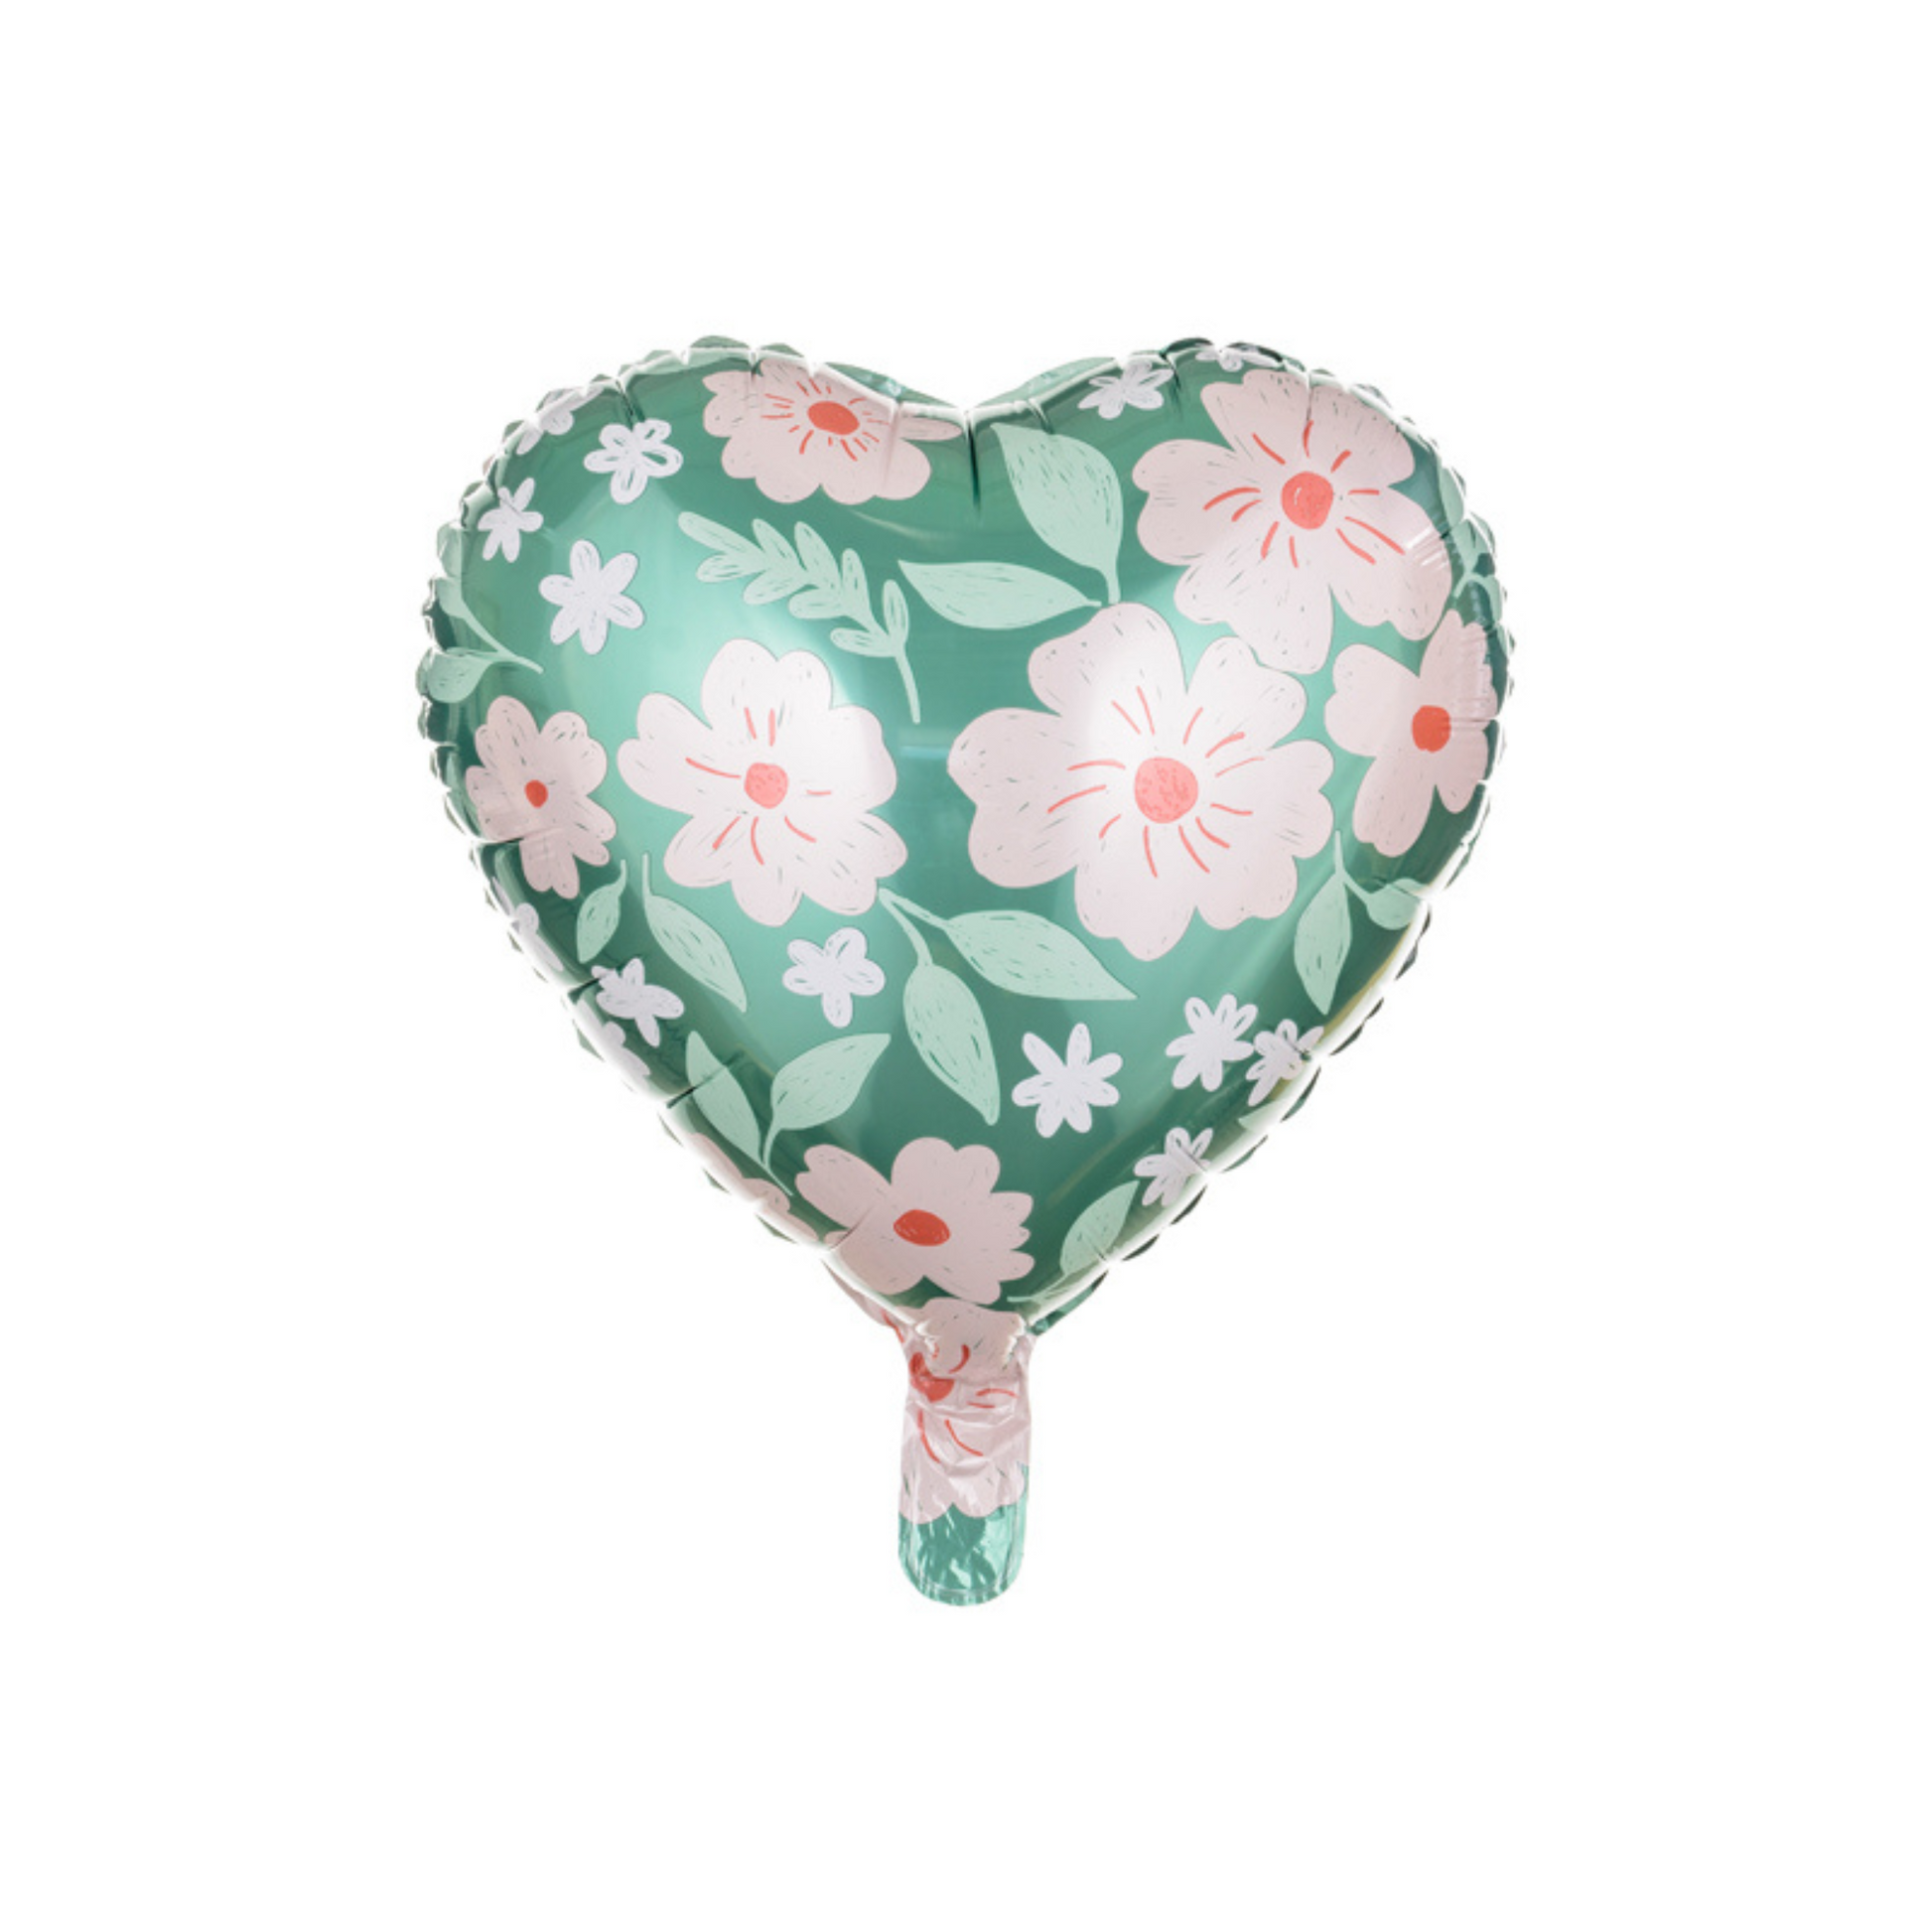 heart shaped foil balloon with pink florals and greenery illustrations